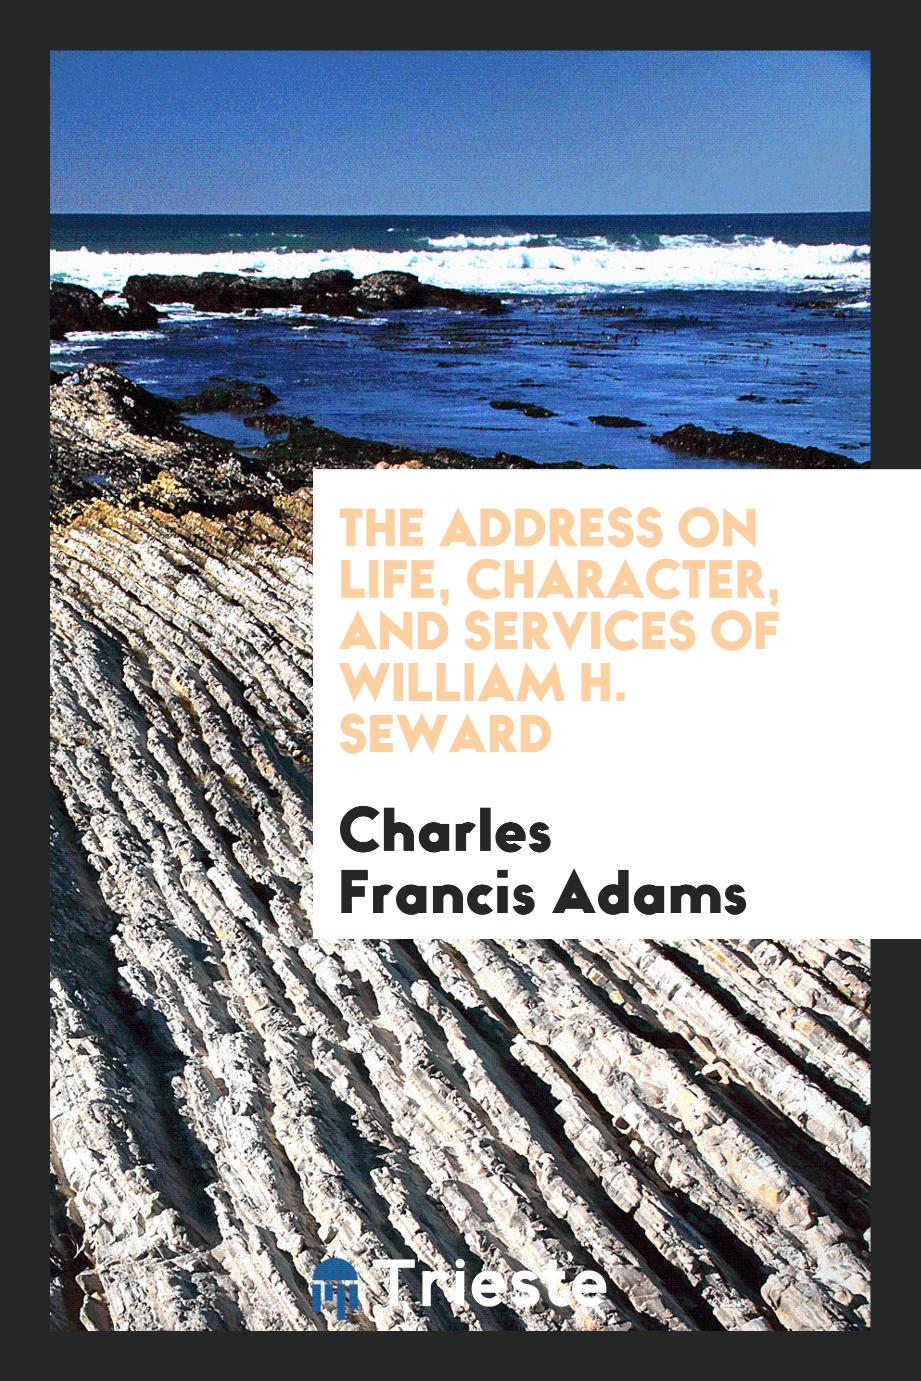 The Address on life, character, and services of William H. Seward